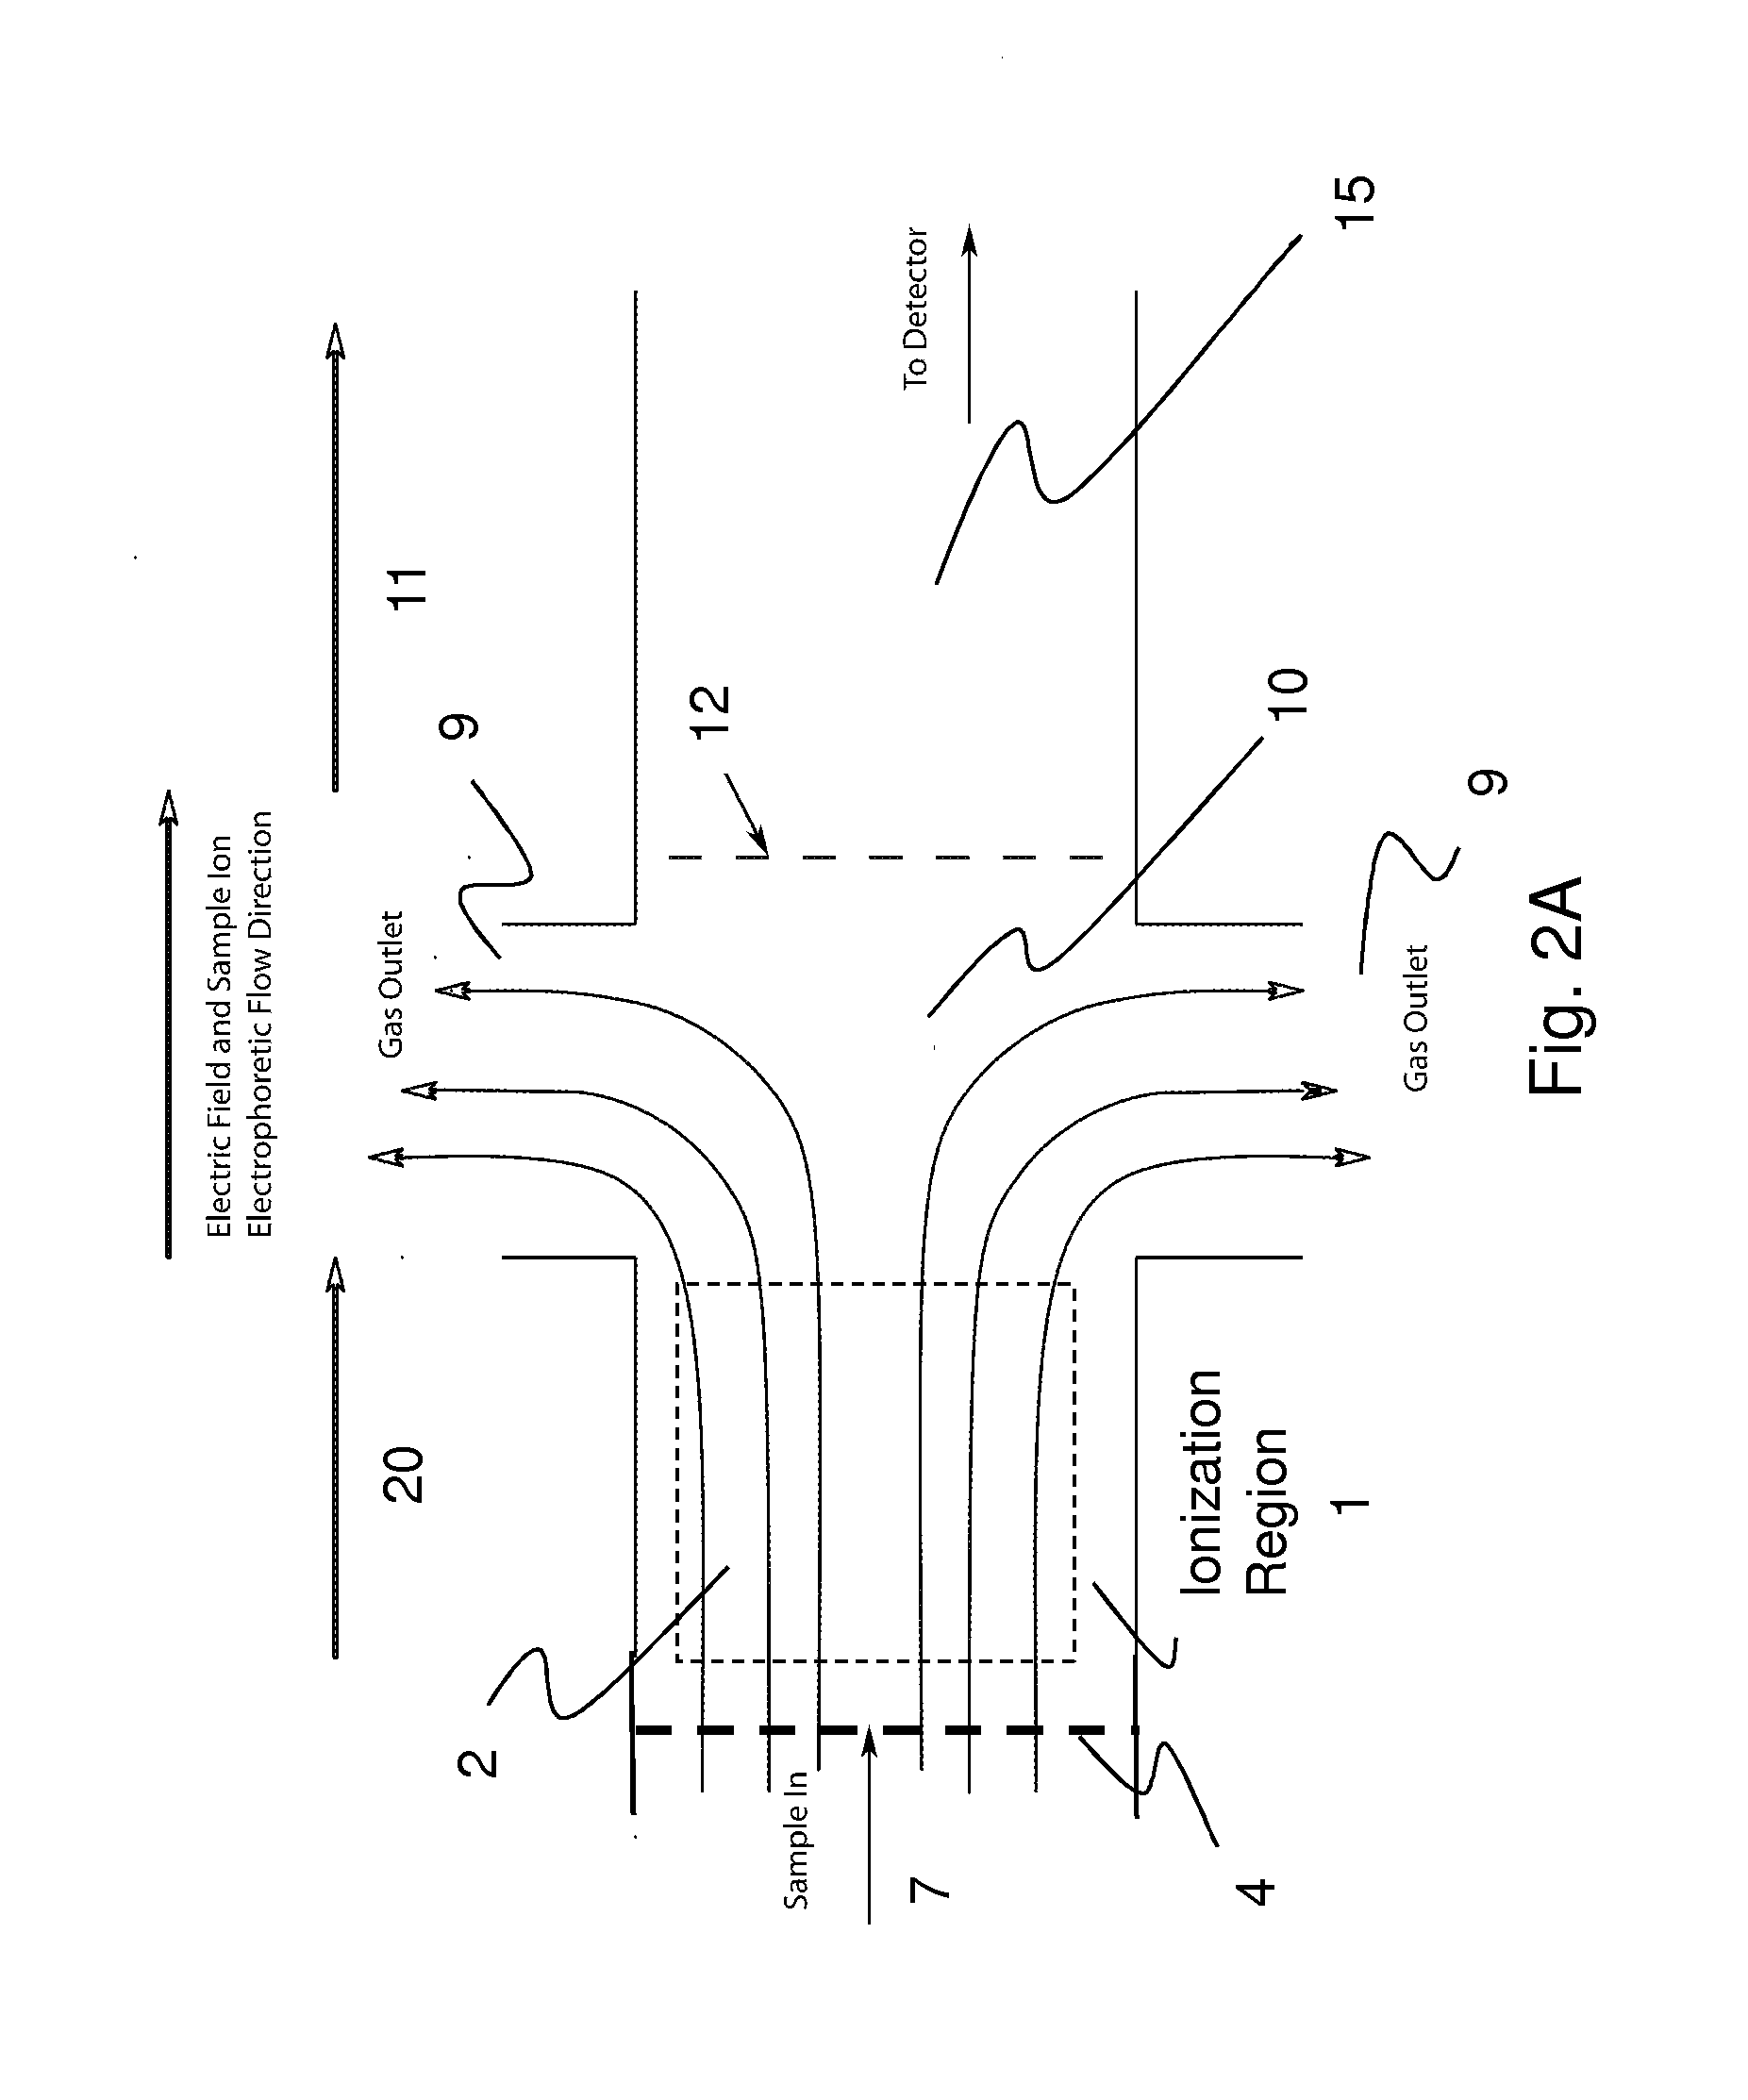 Sensitive Ion Detection Device and Method for Analysis of Compounds as Vapors in Gases